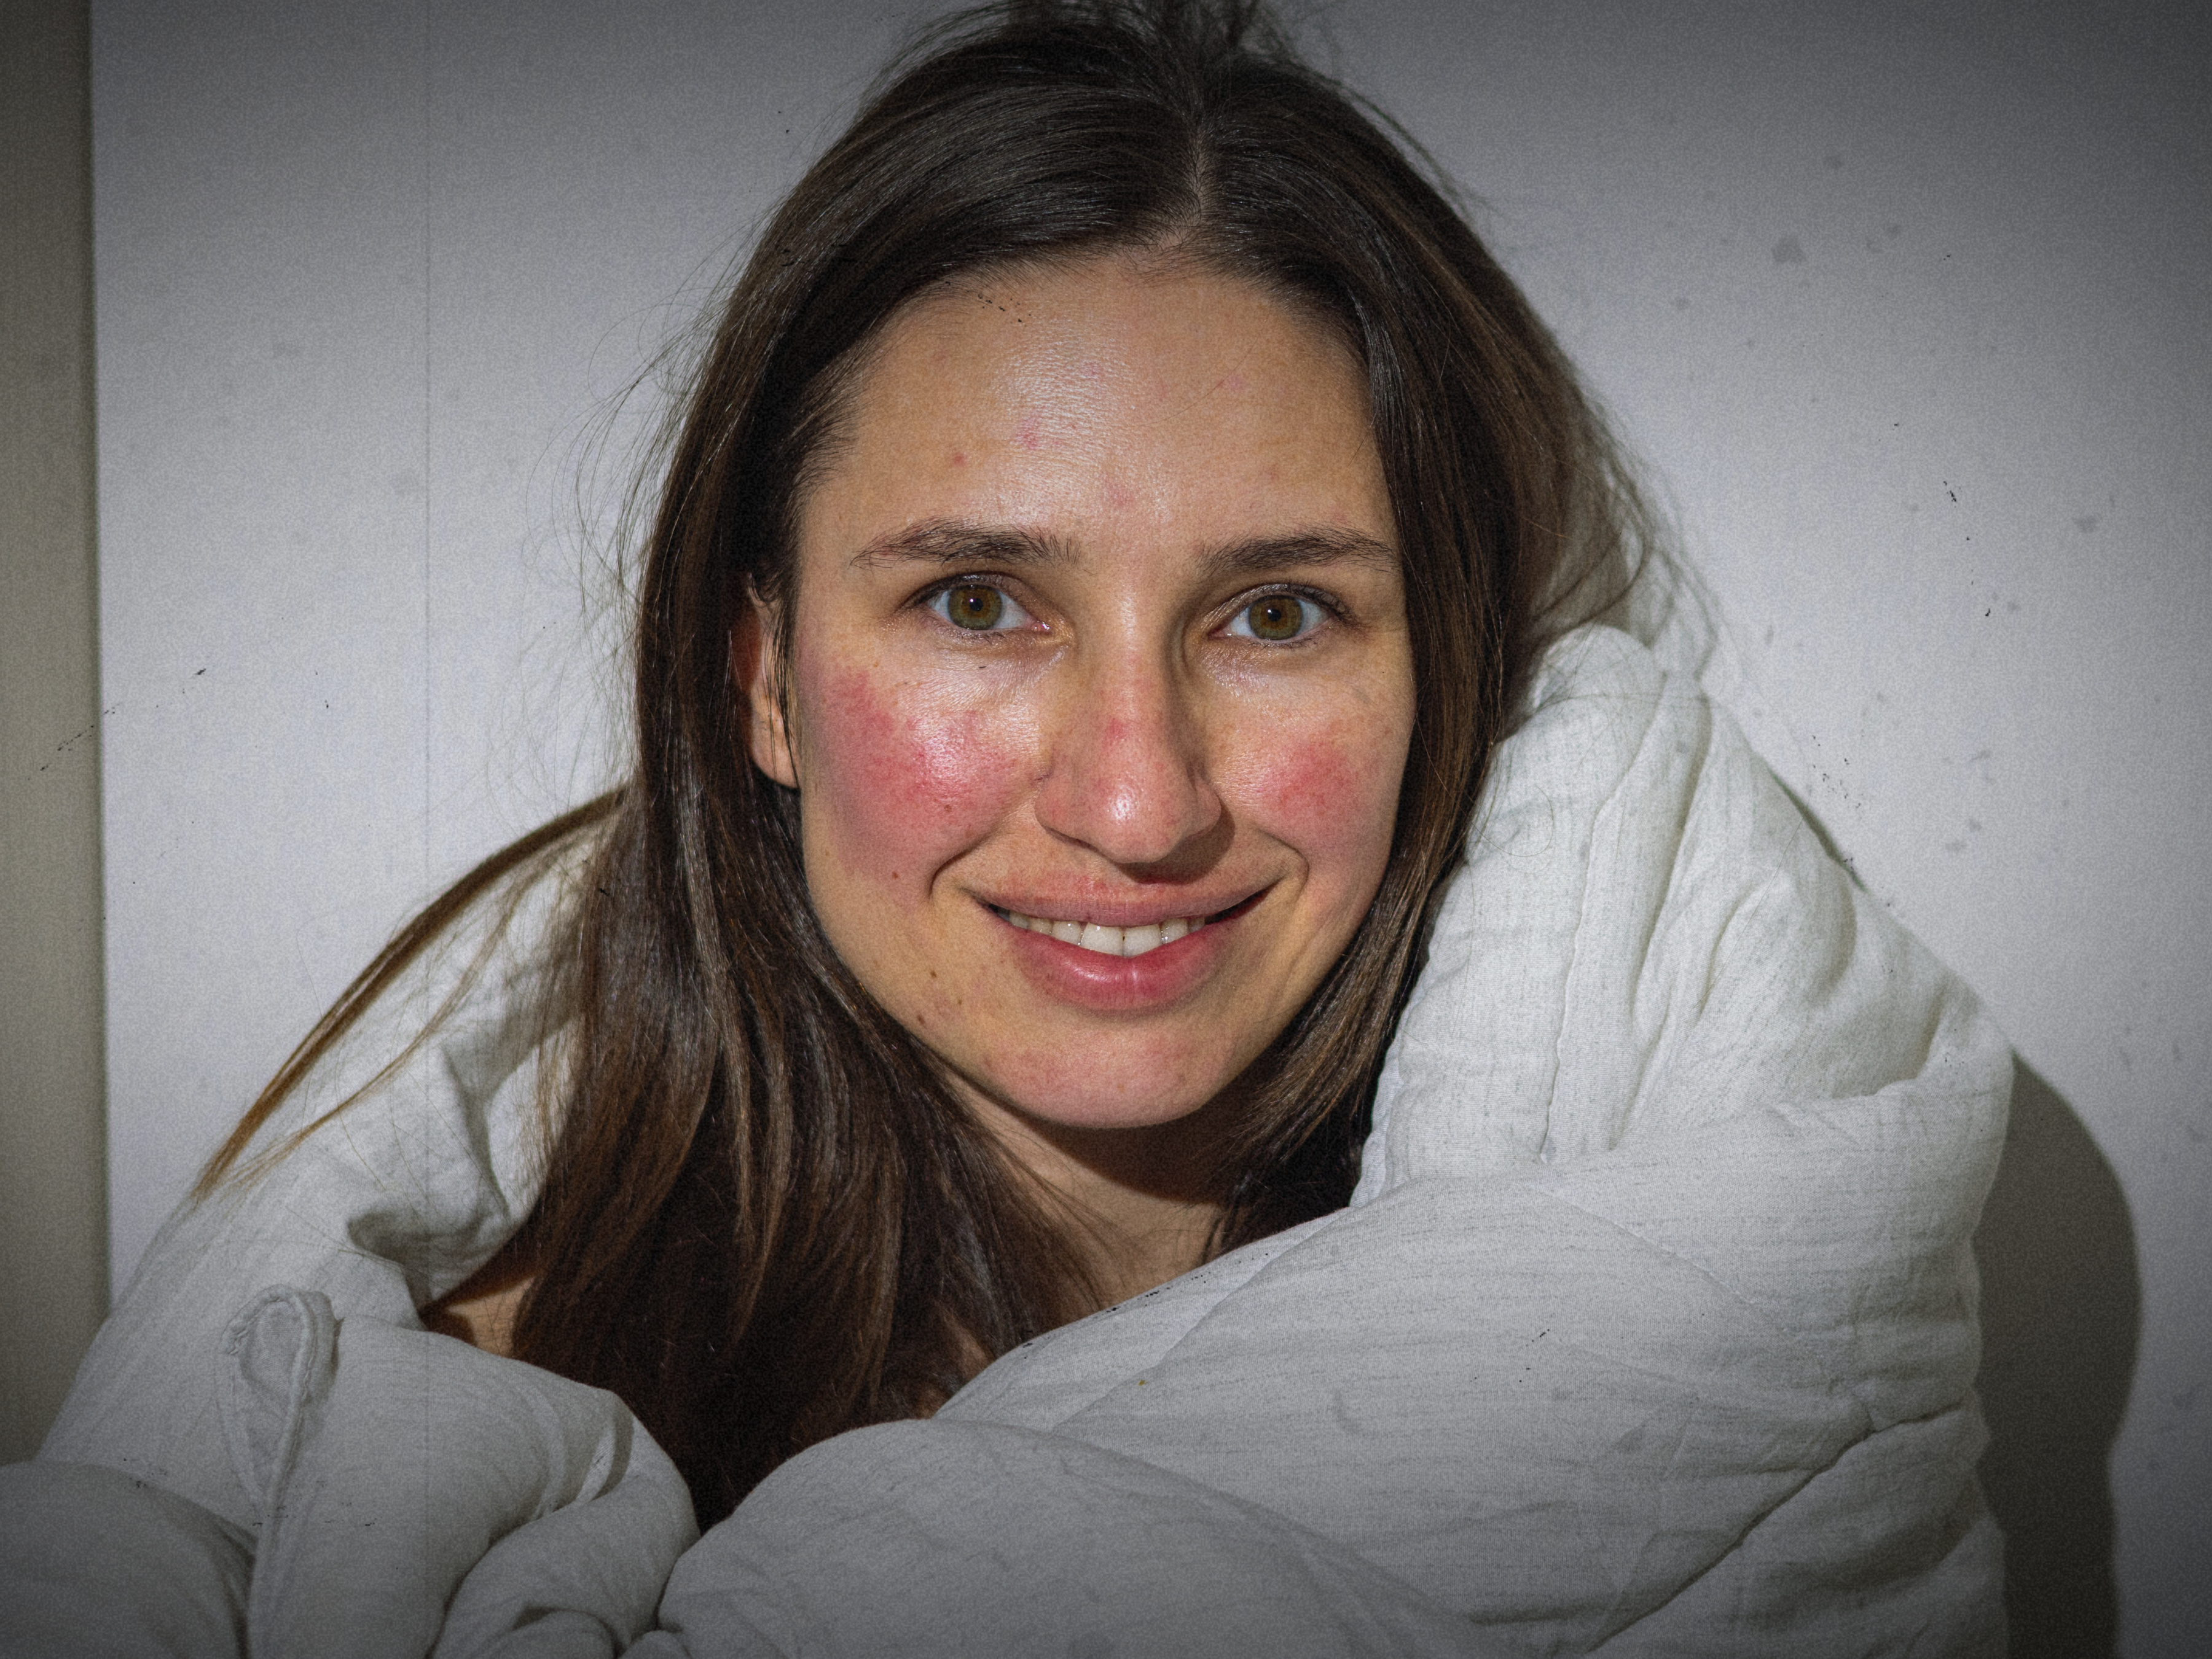 Woman smiling with Type 1 rosacea redness on the cheeks. How to Treat Flare-ups Naturally - The Rosacea Method - Dr. Tara O'Desky.